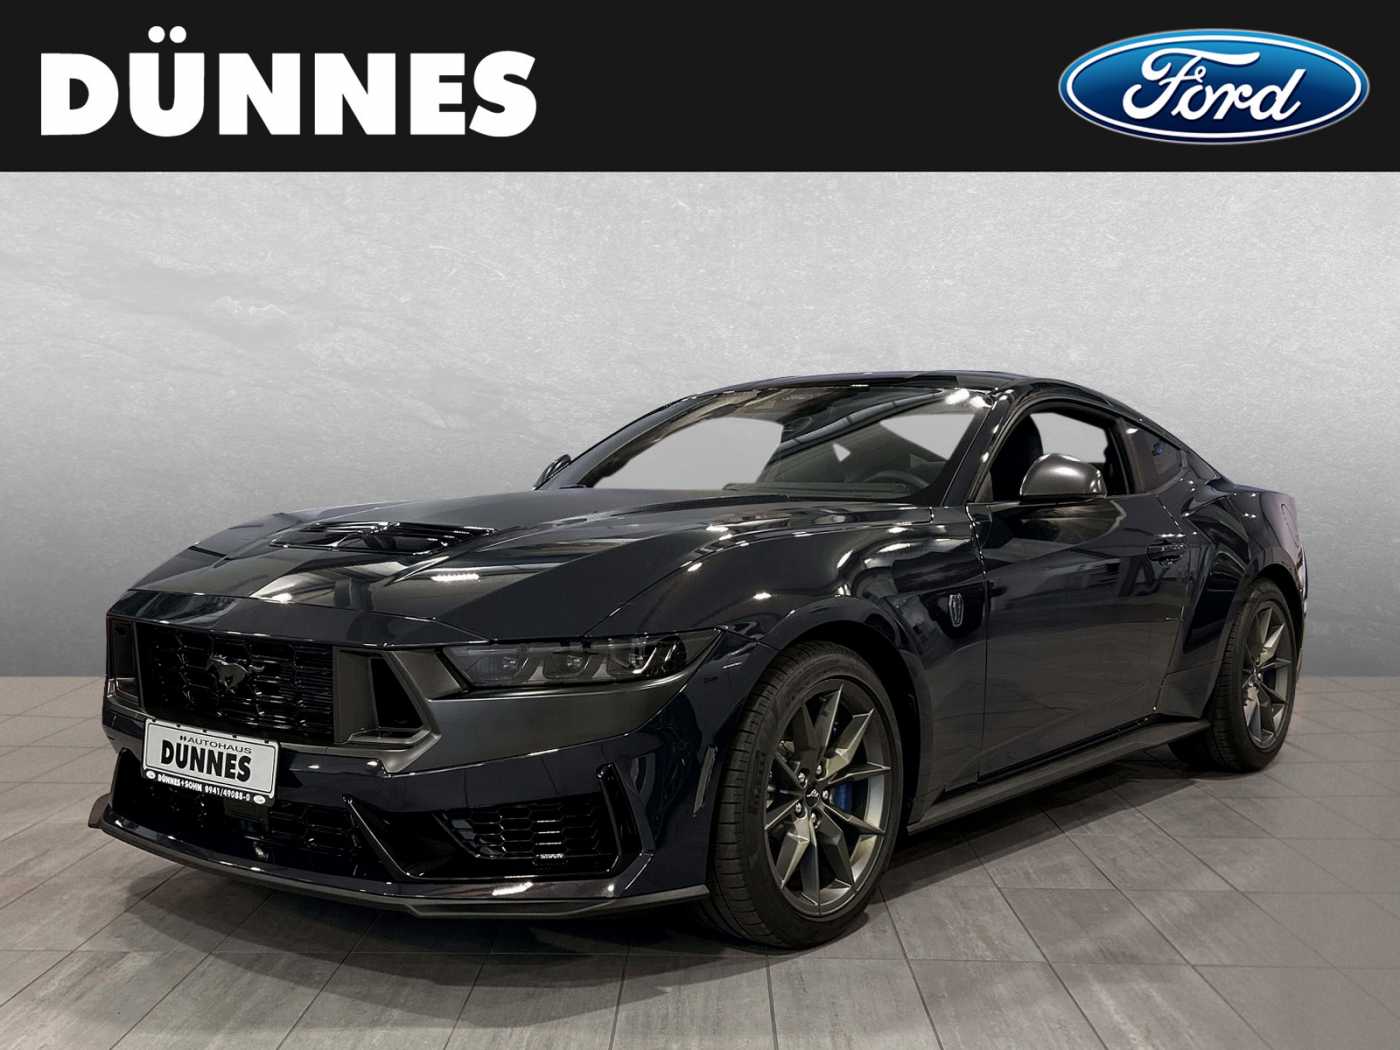 Ford Mustang 5.0 Ti-VCT Coupe V8 Dark Horse